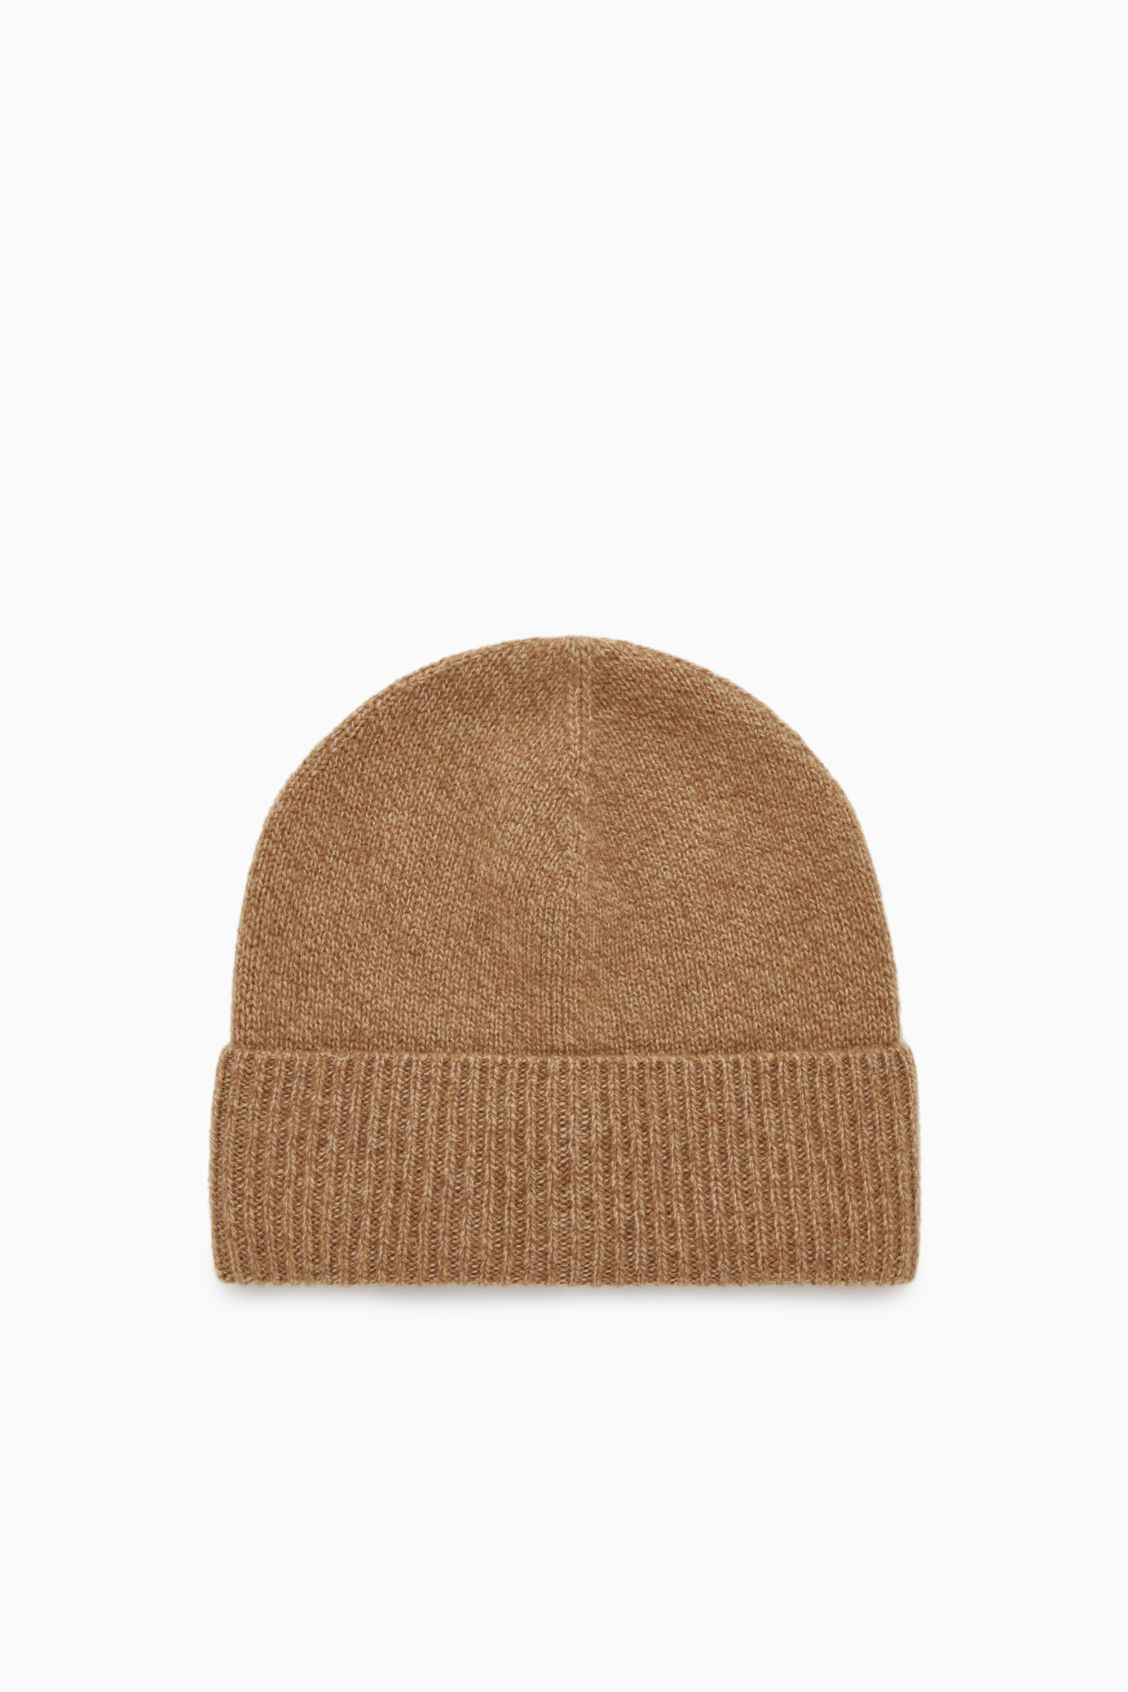 PURE CASHMERE BEANIE | COS UK